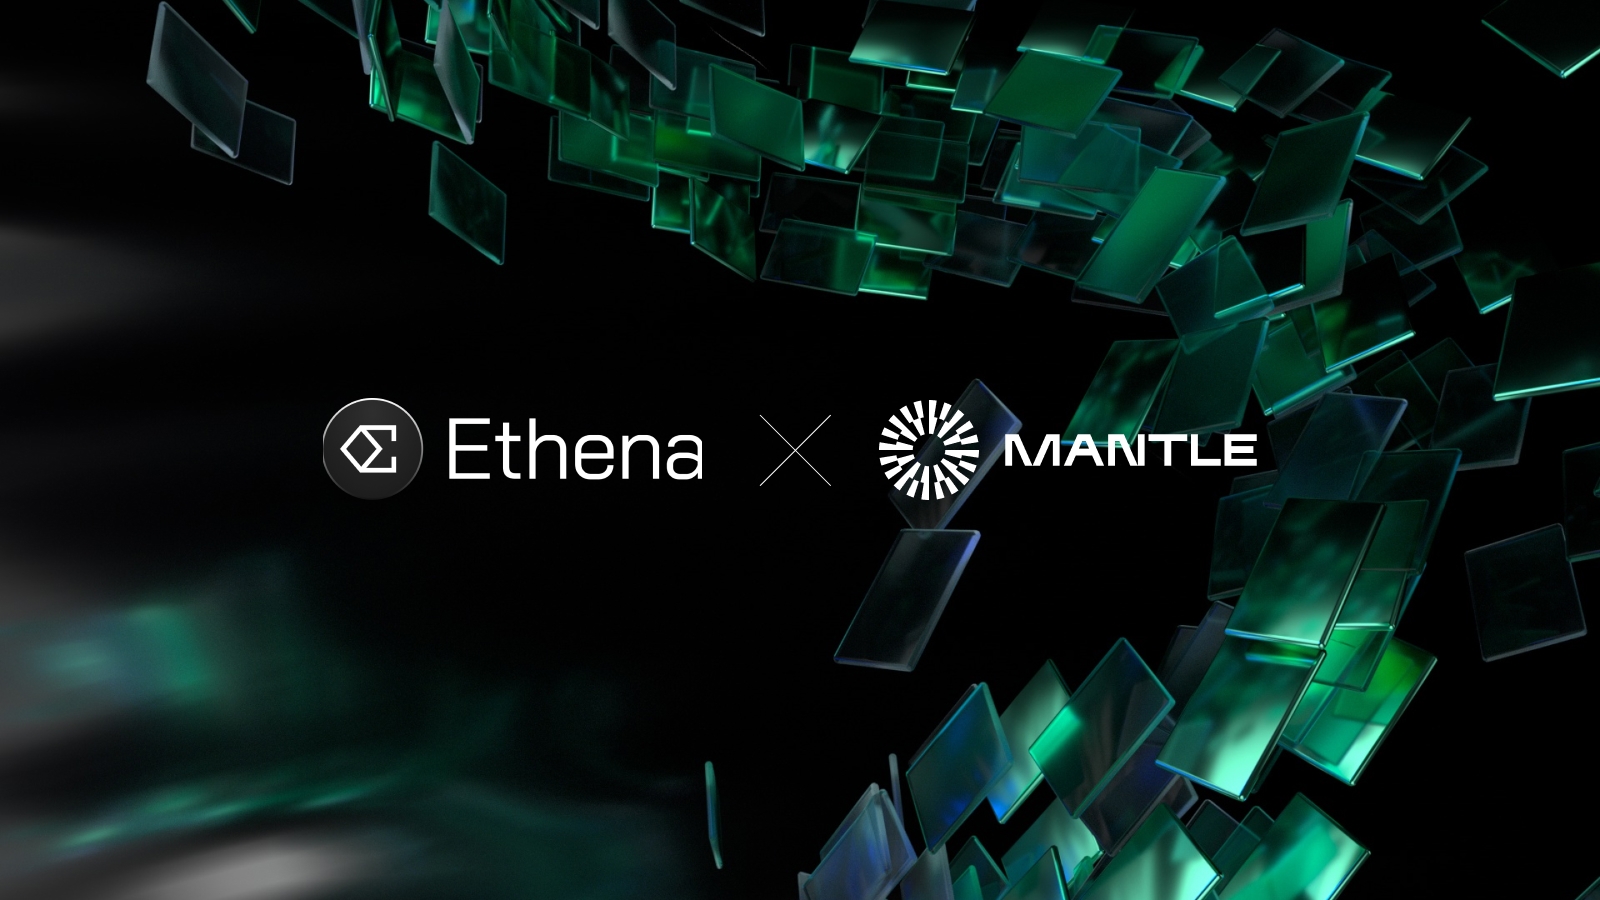 Mantle Showcase: Ethena to Deploy USDe on Mantle Network in Special Pre-Launch